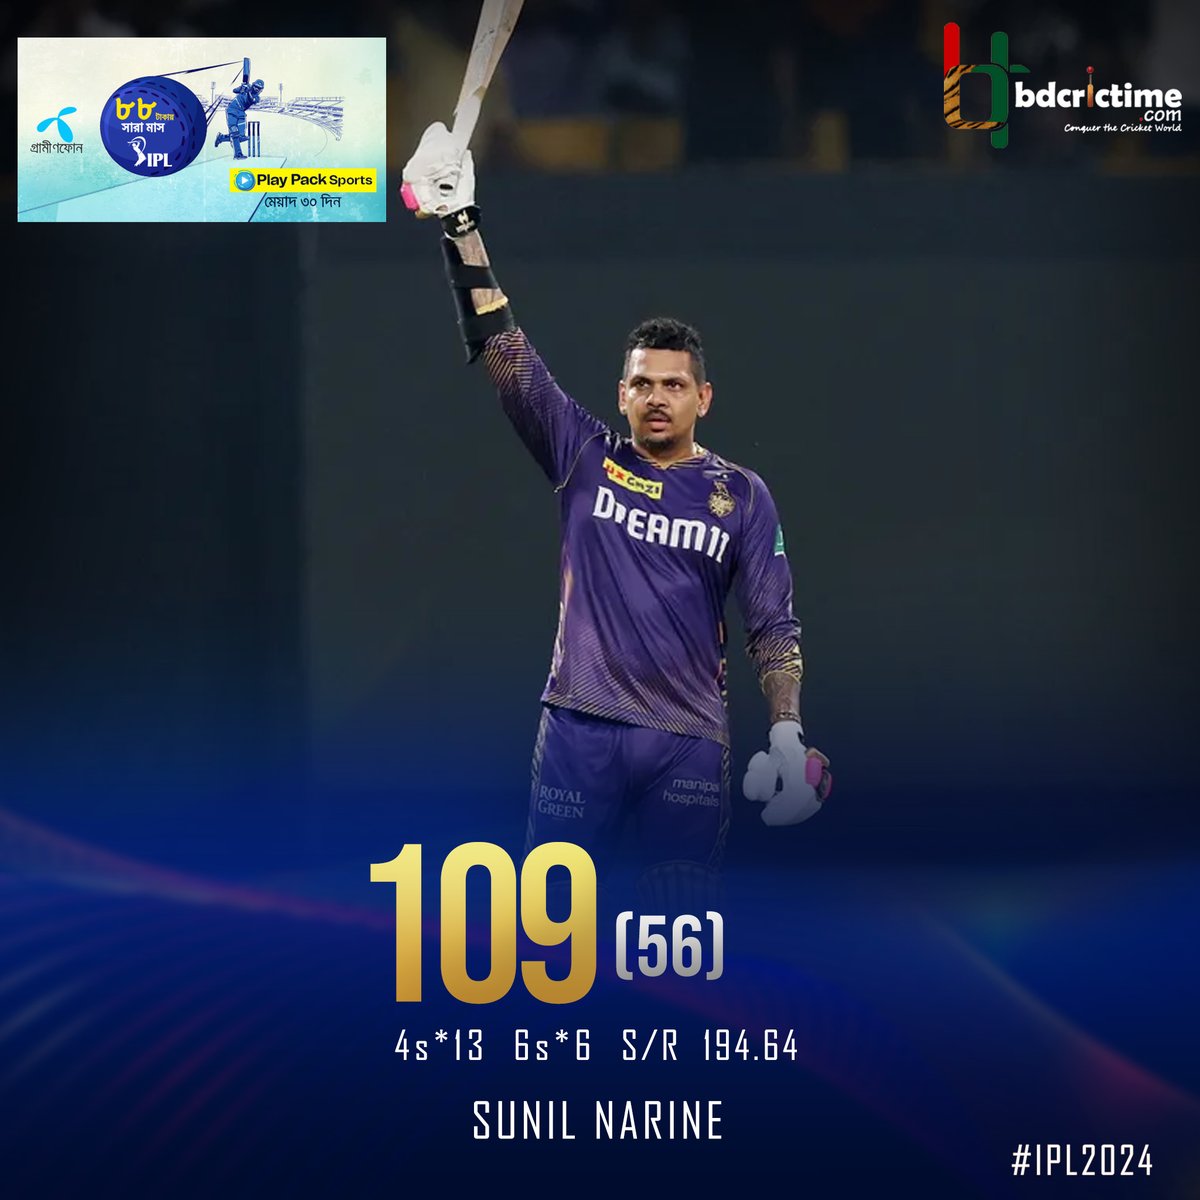 CAREER BEST INNINGS IN T20S!

Another day, Another Sunil Narine's blistering knock

#IPL2024 #MyGP